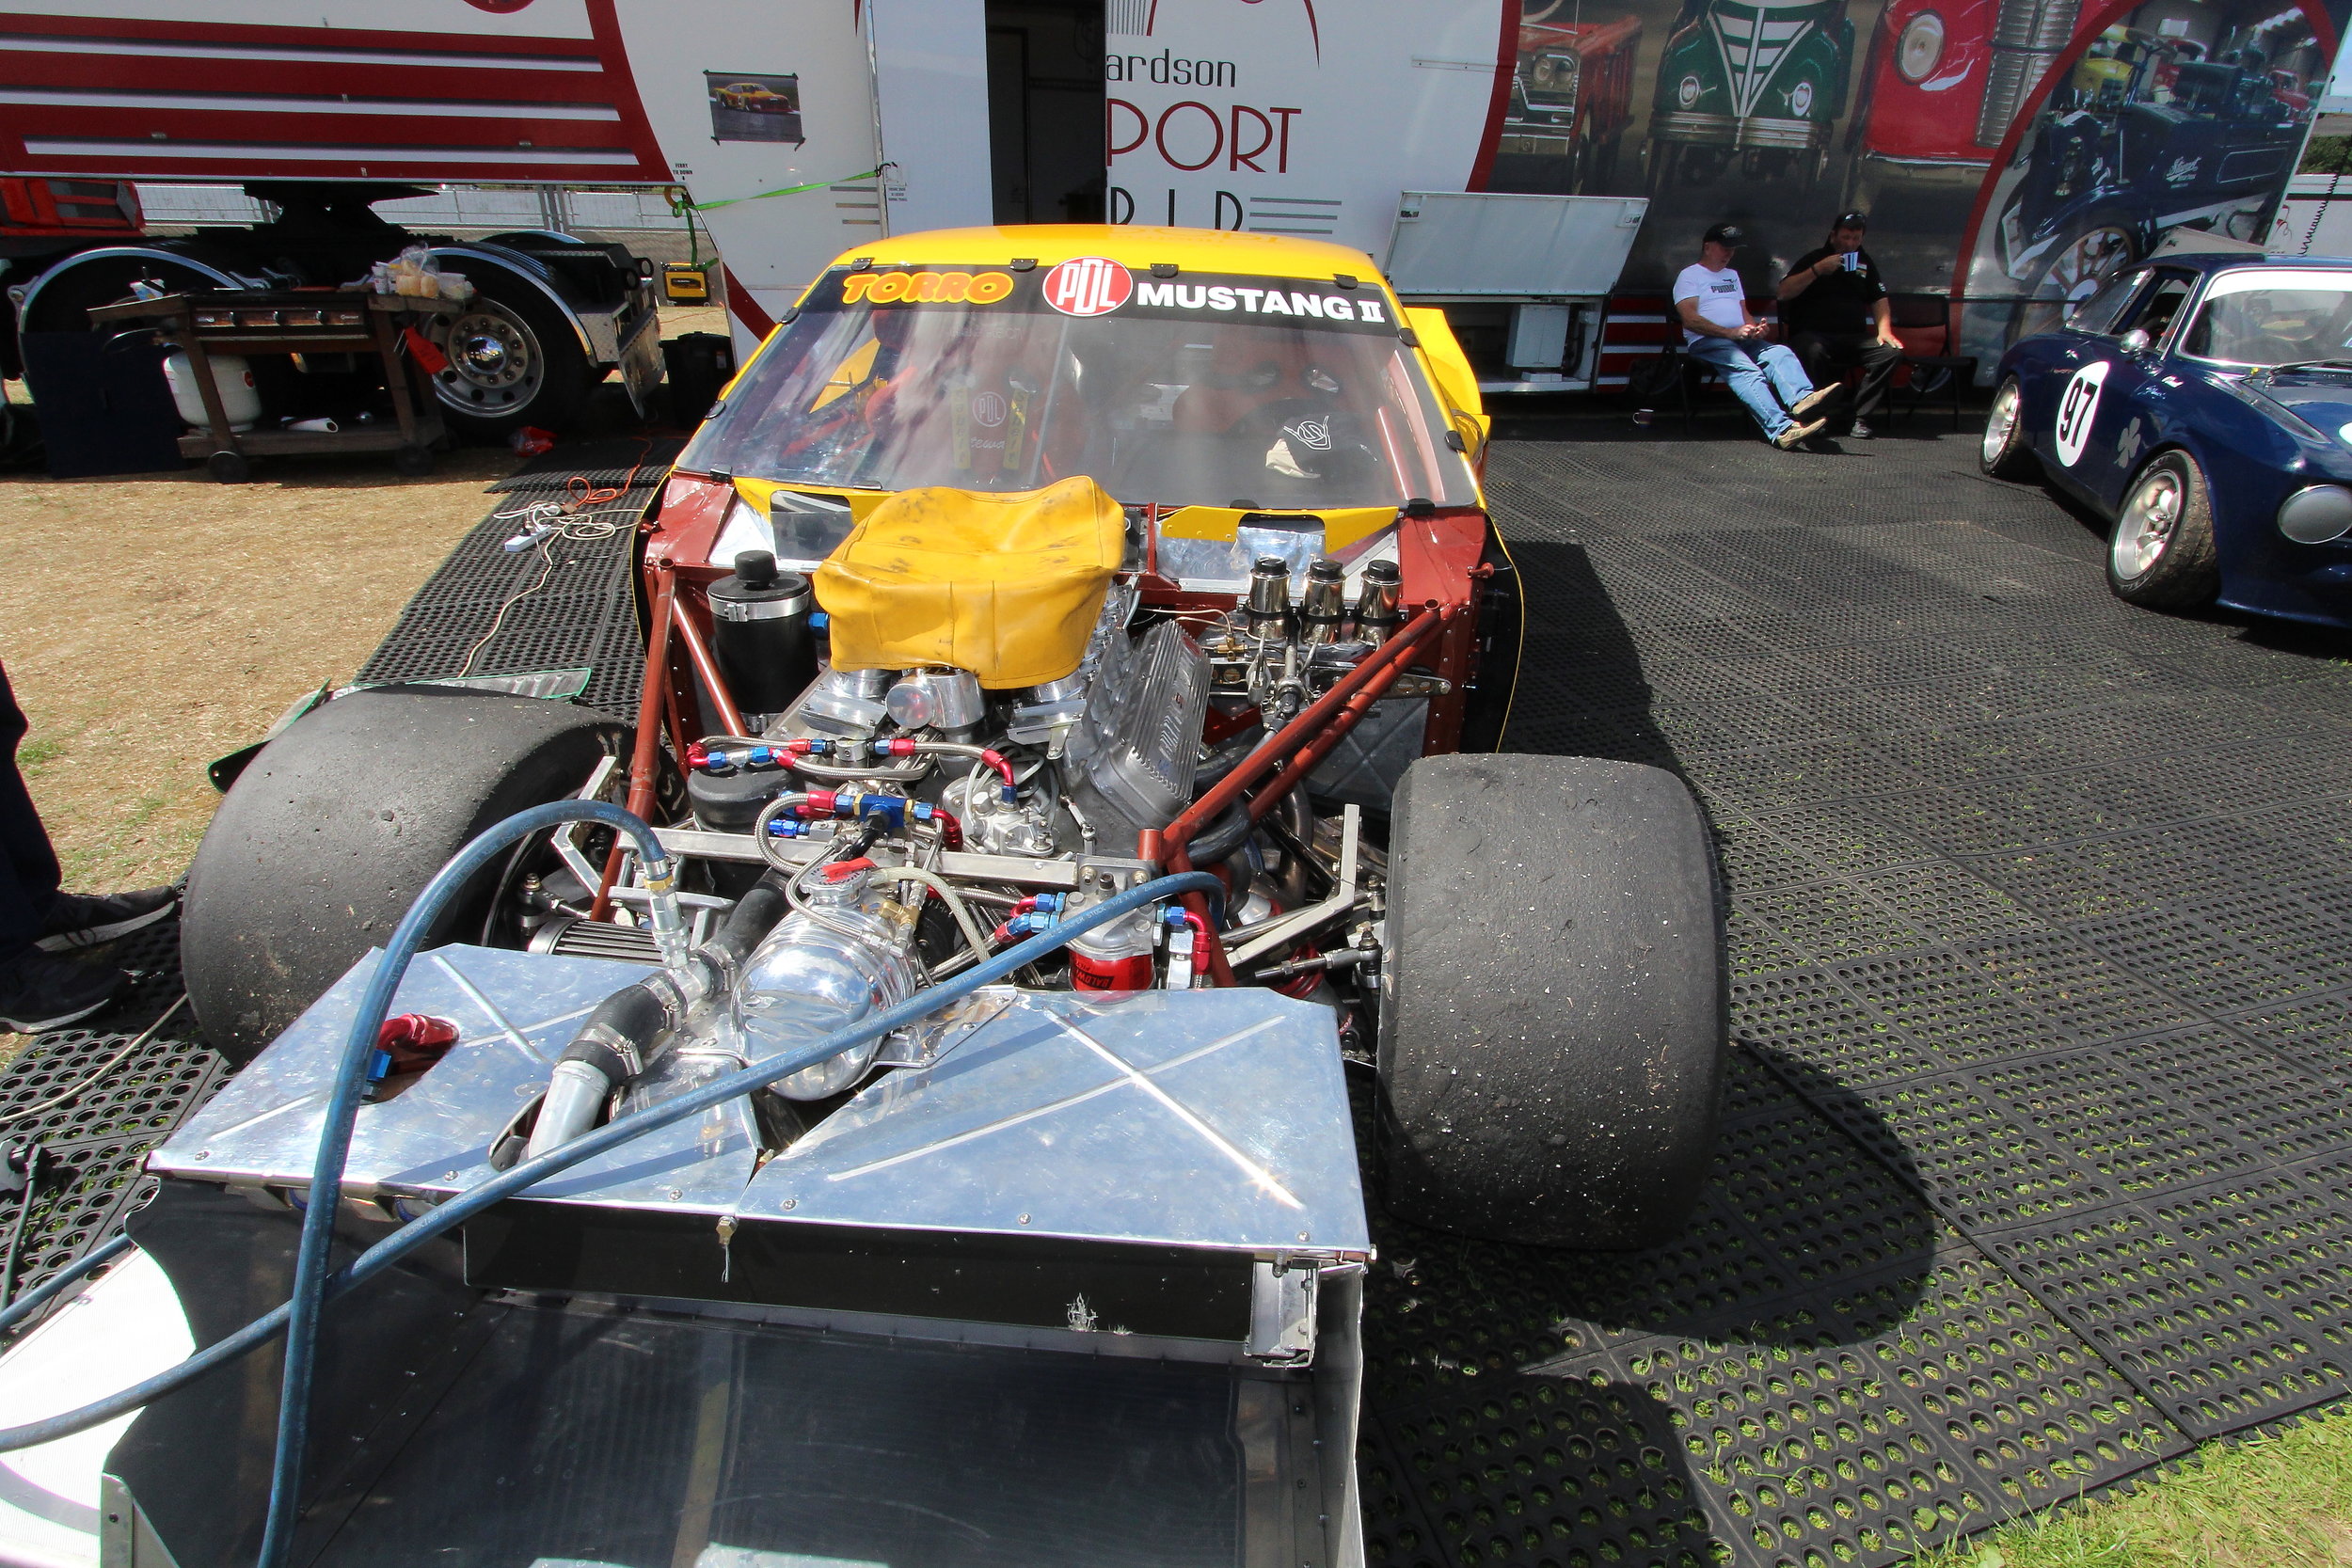  Back on track: Sunday and the team has repaired the PDL Mustang of Todd Stewart 